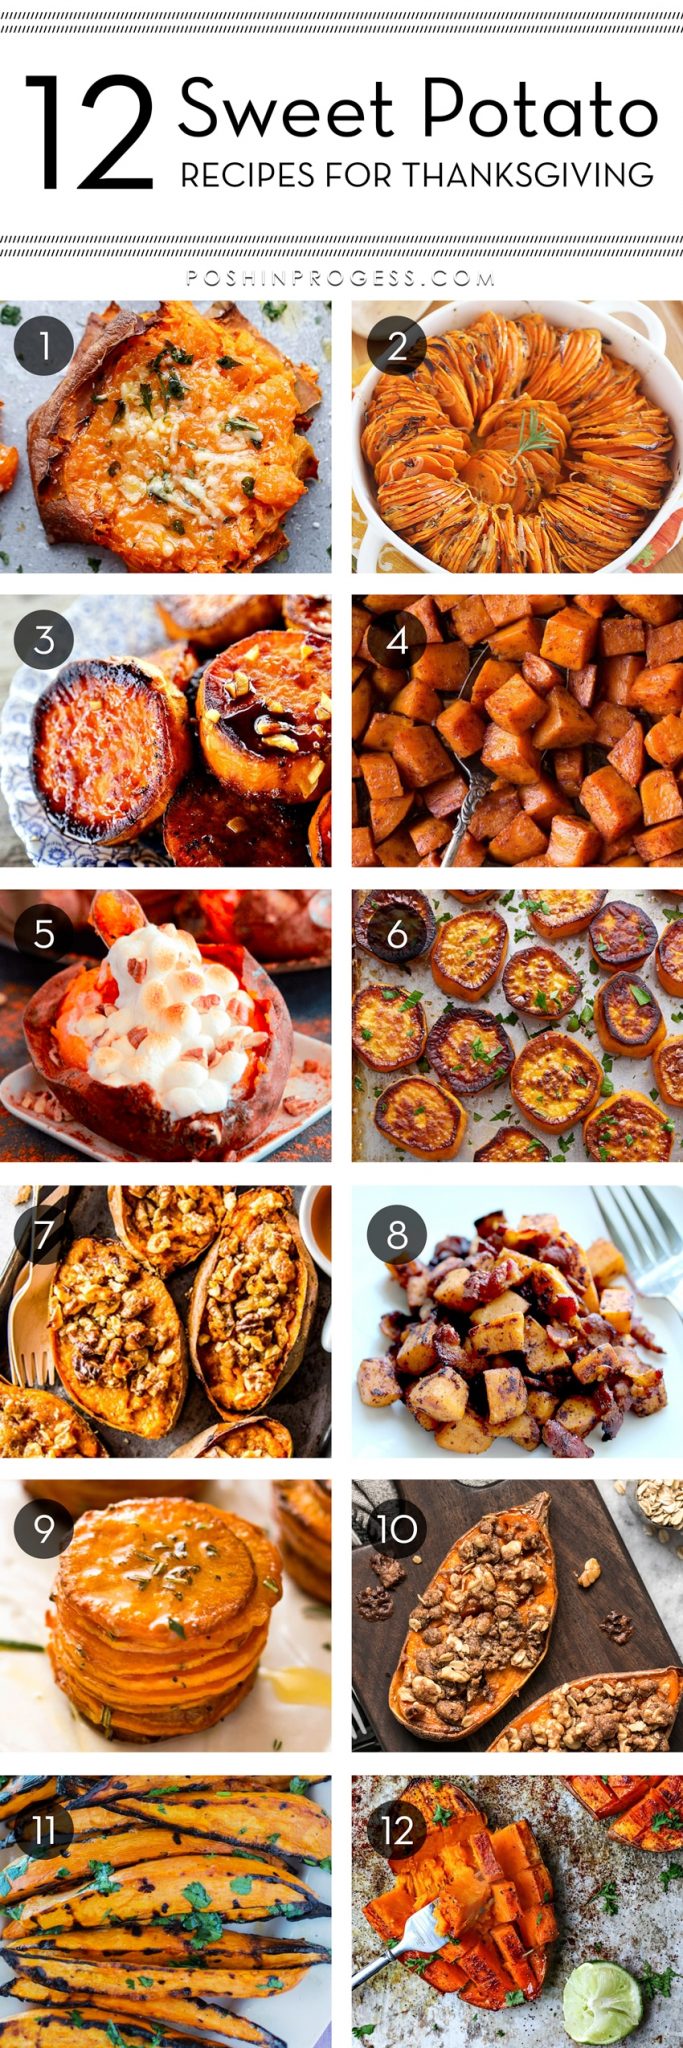 12 Sweet Potato Recipes for Thanksgiving You Need to Try